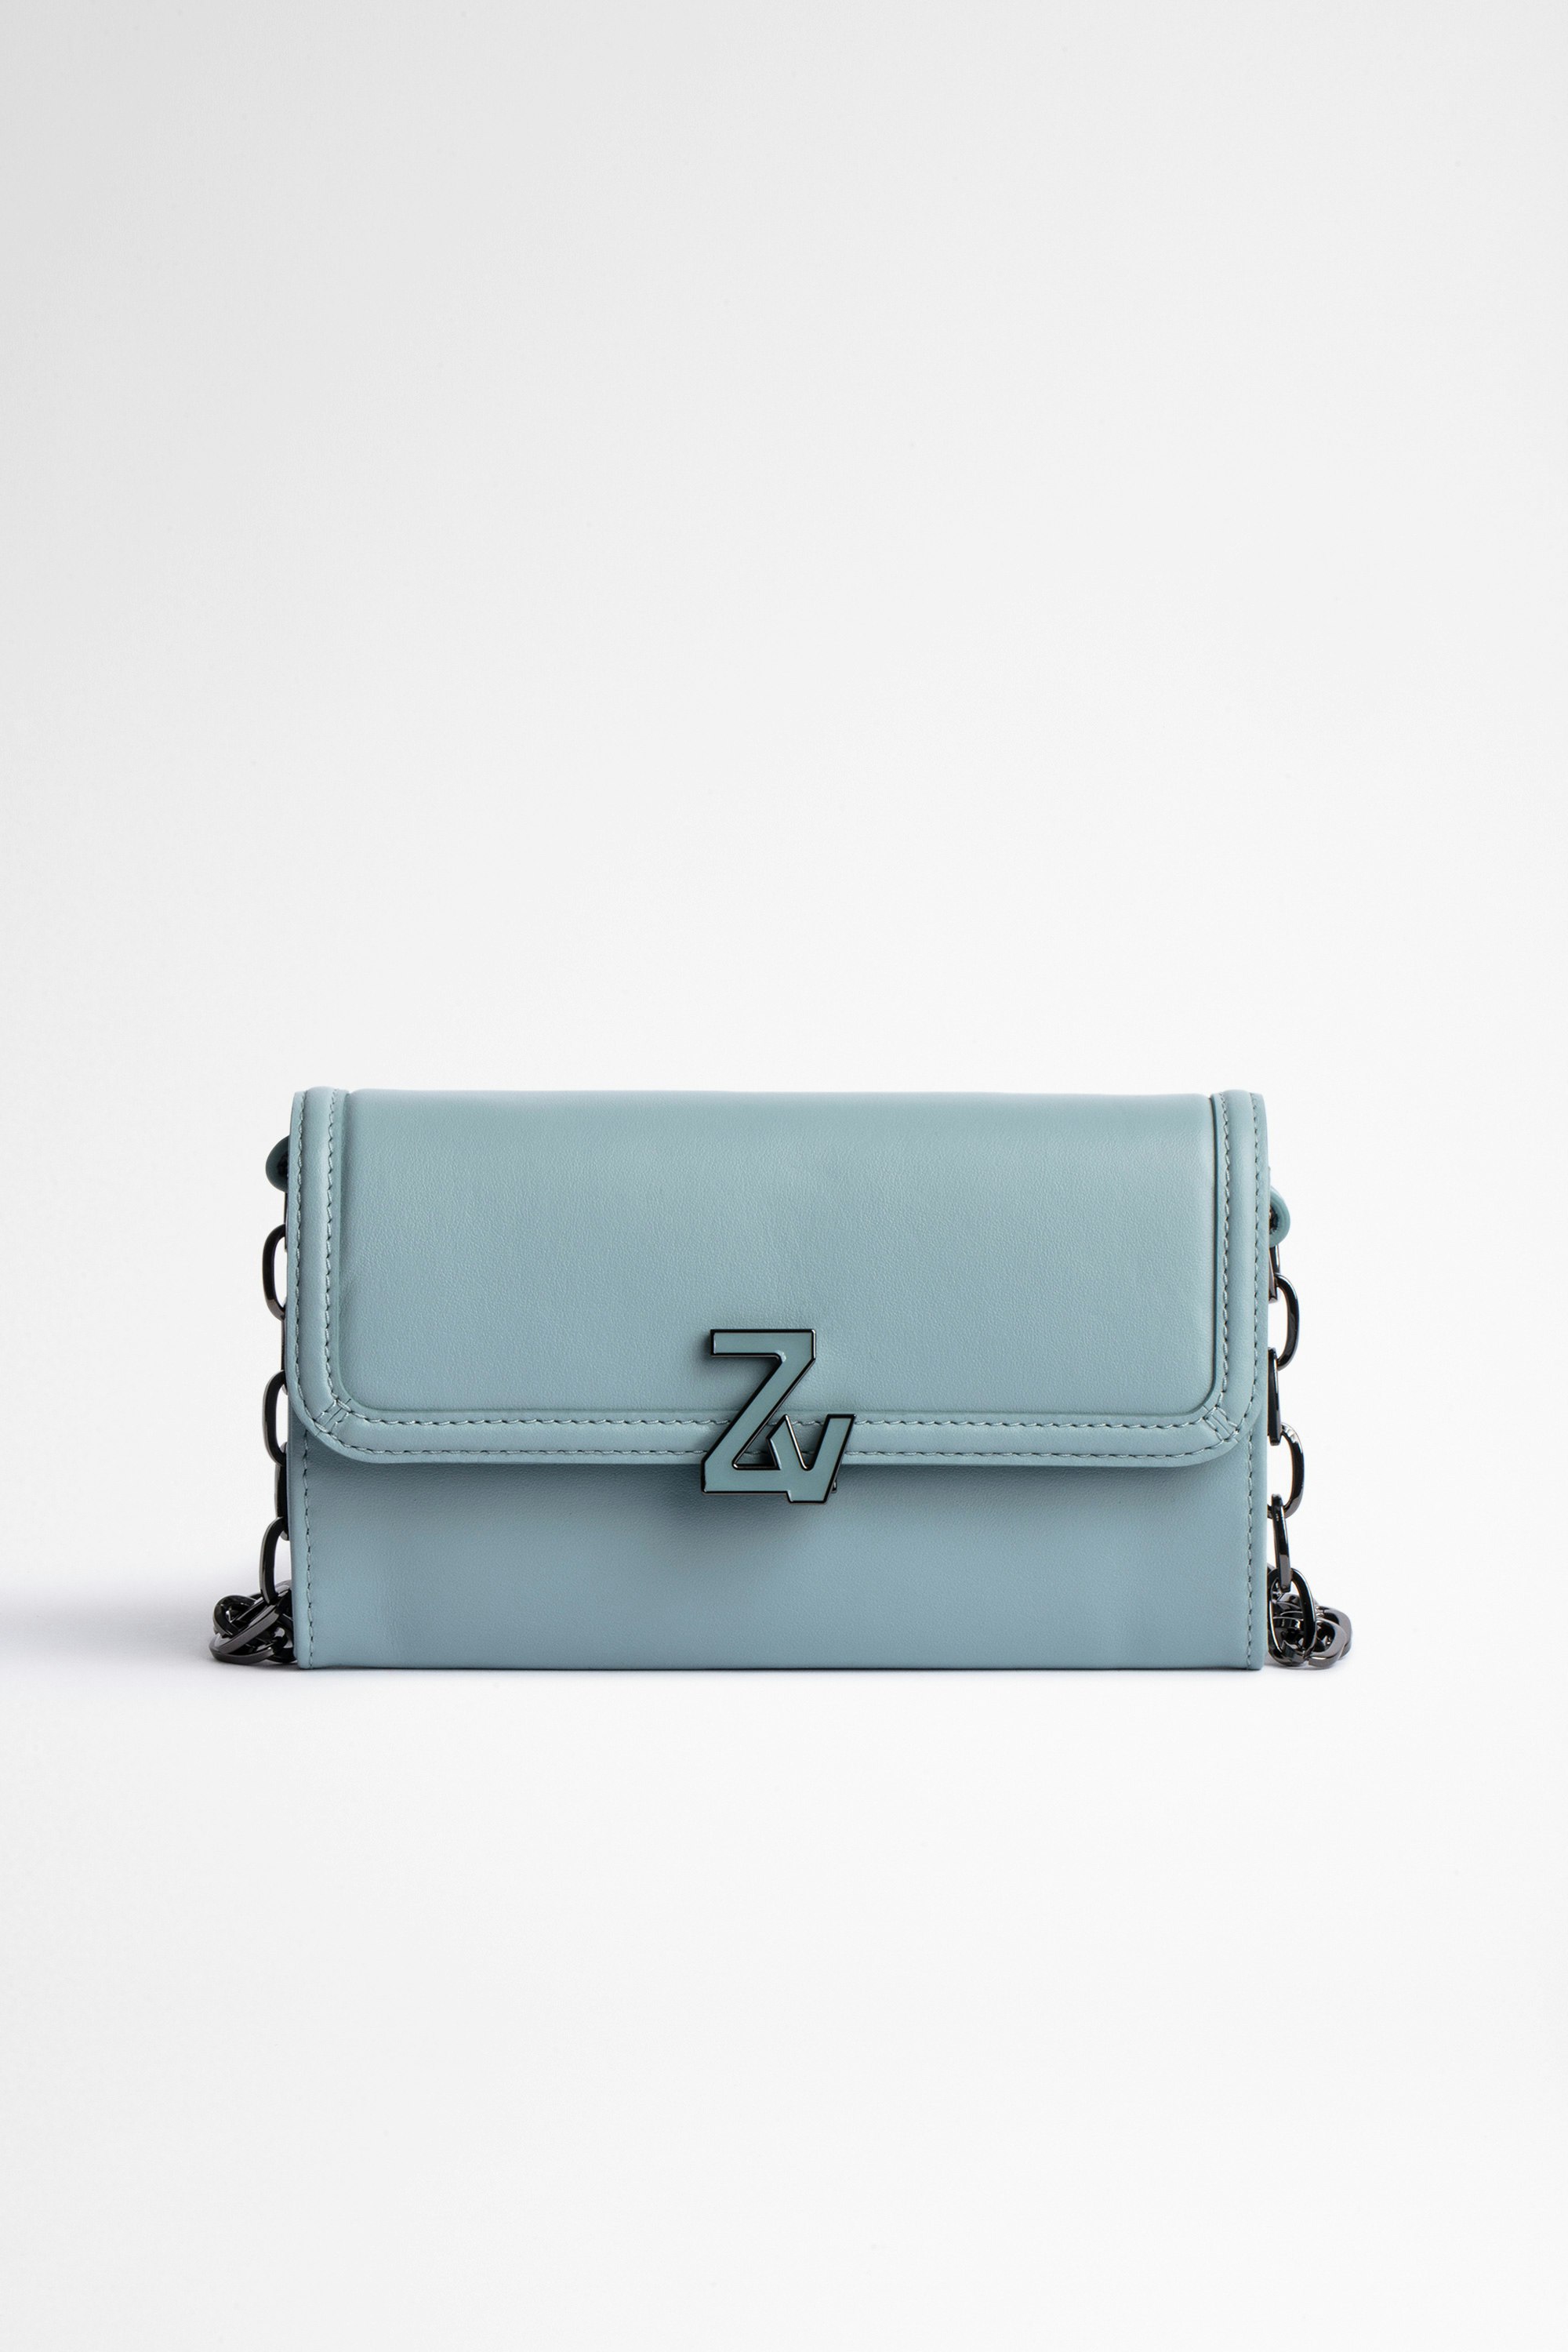 ZV Initiale Le Long Unchained Wallet Women's sky-blue smooth leather wallet with shoulder strap 